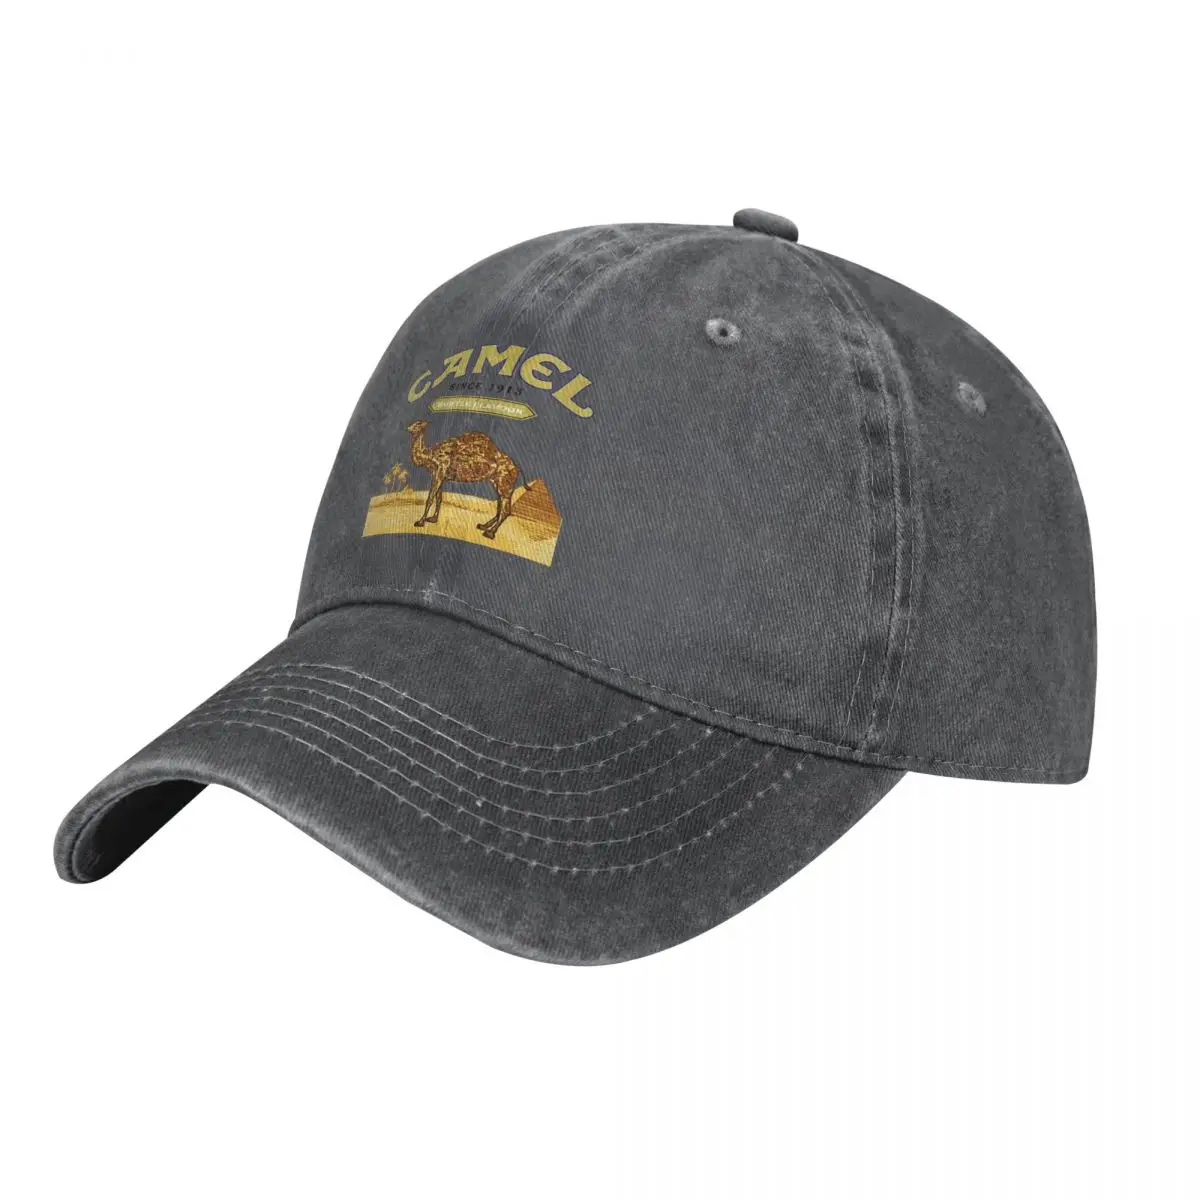 

Camel Trophy Since 1913 Vintage Outdoor Denim Washed Baseball Cap For Men Casual Male Snapback Caps Spring And Summer Peaked Cap